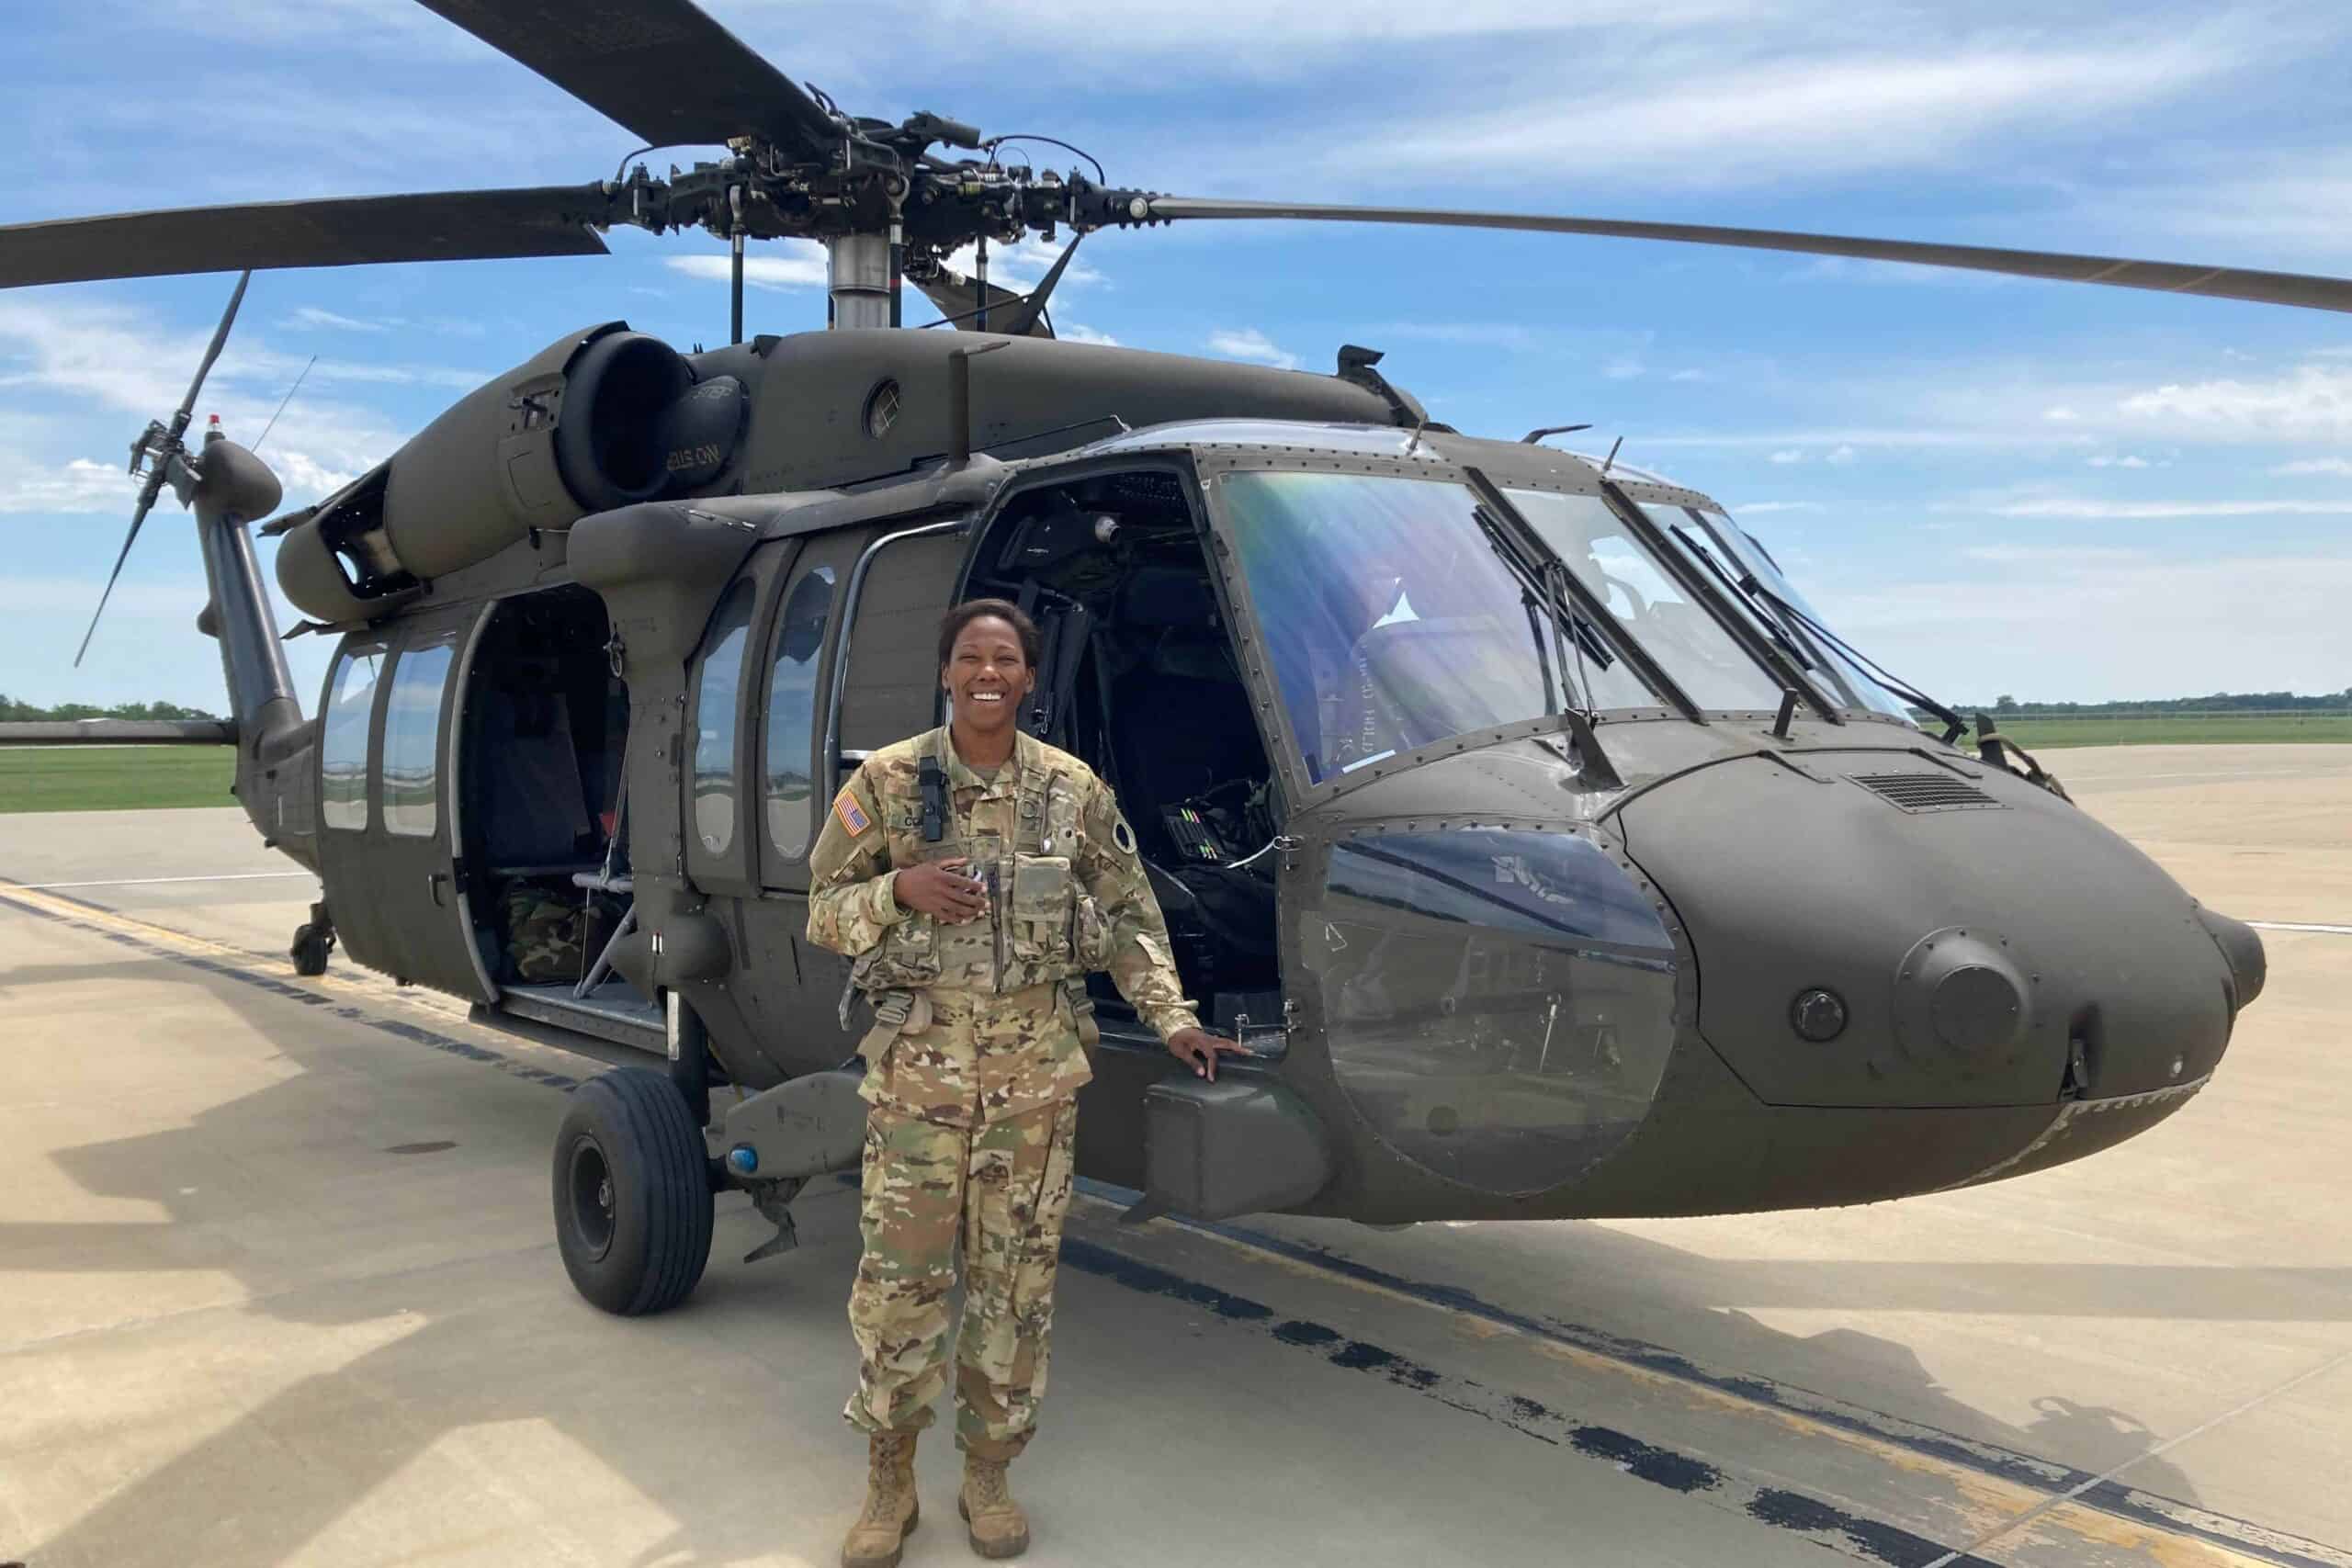 Army 2nd Lt. Gabrielle Cole poses with a UH-60 Black Hawk